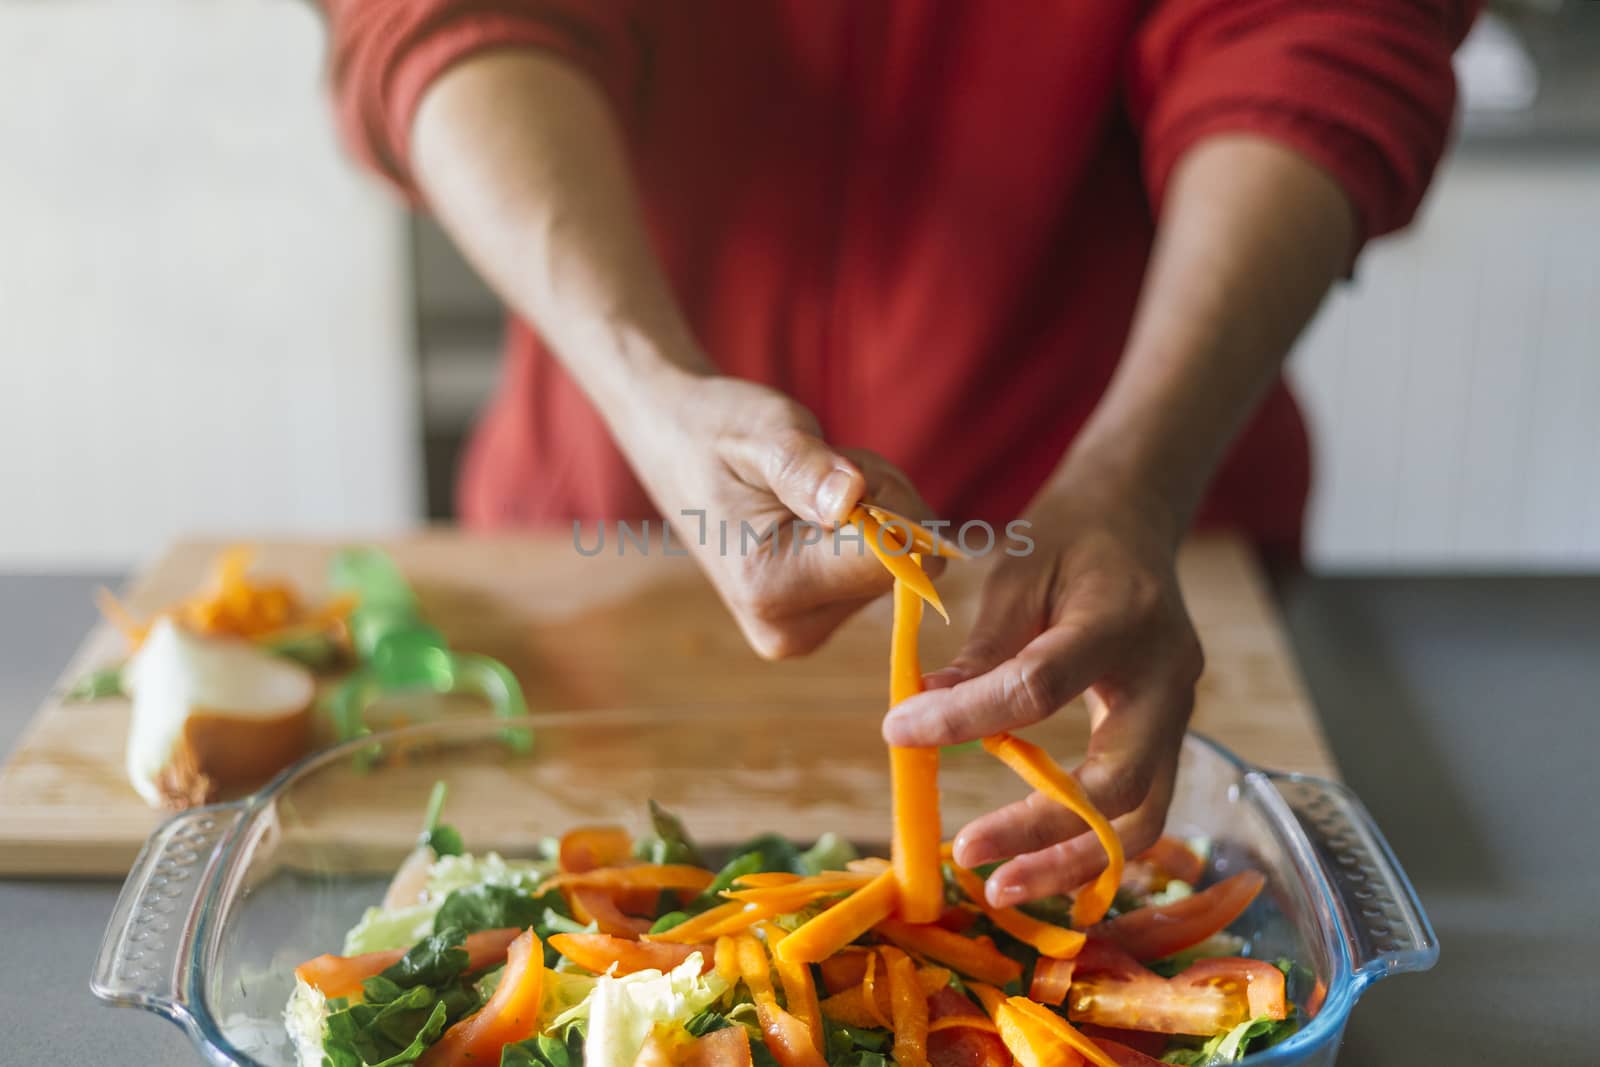 Woman cutting carrots and putting them in a salad by Daniel_Mato